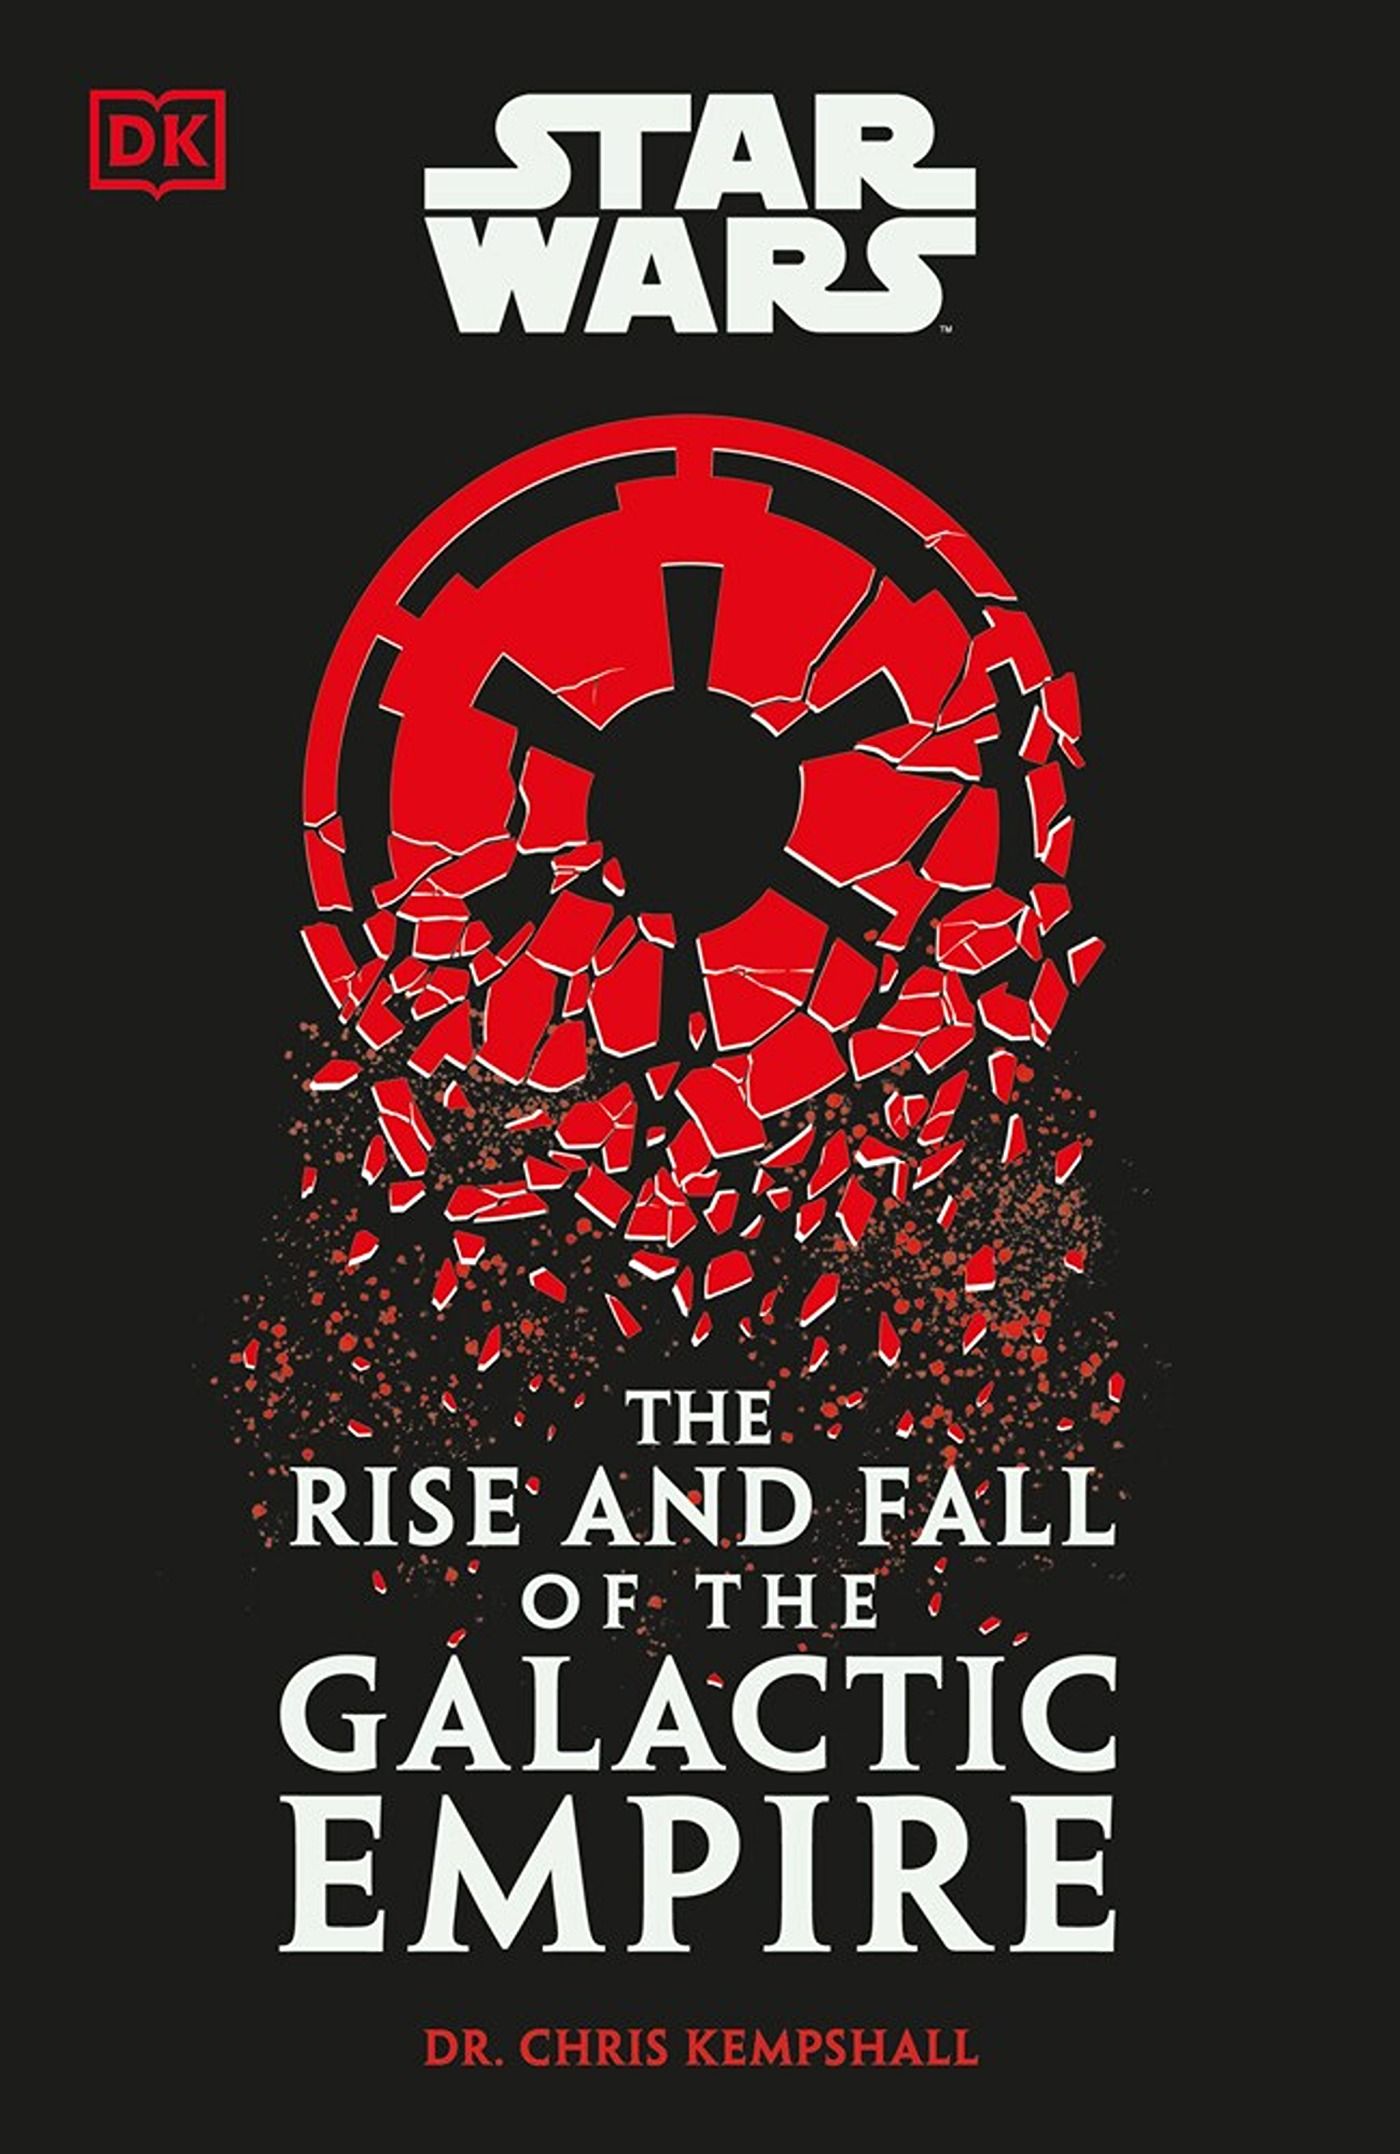 Star Wars The Rise and Fall of the Galactic Empire cover